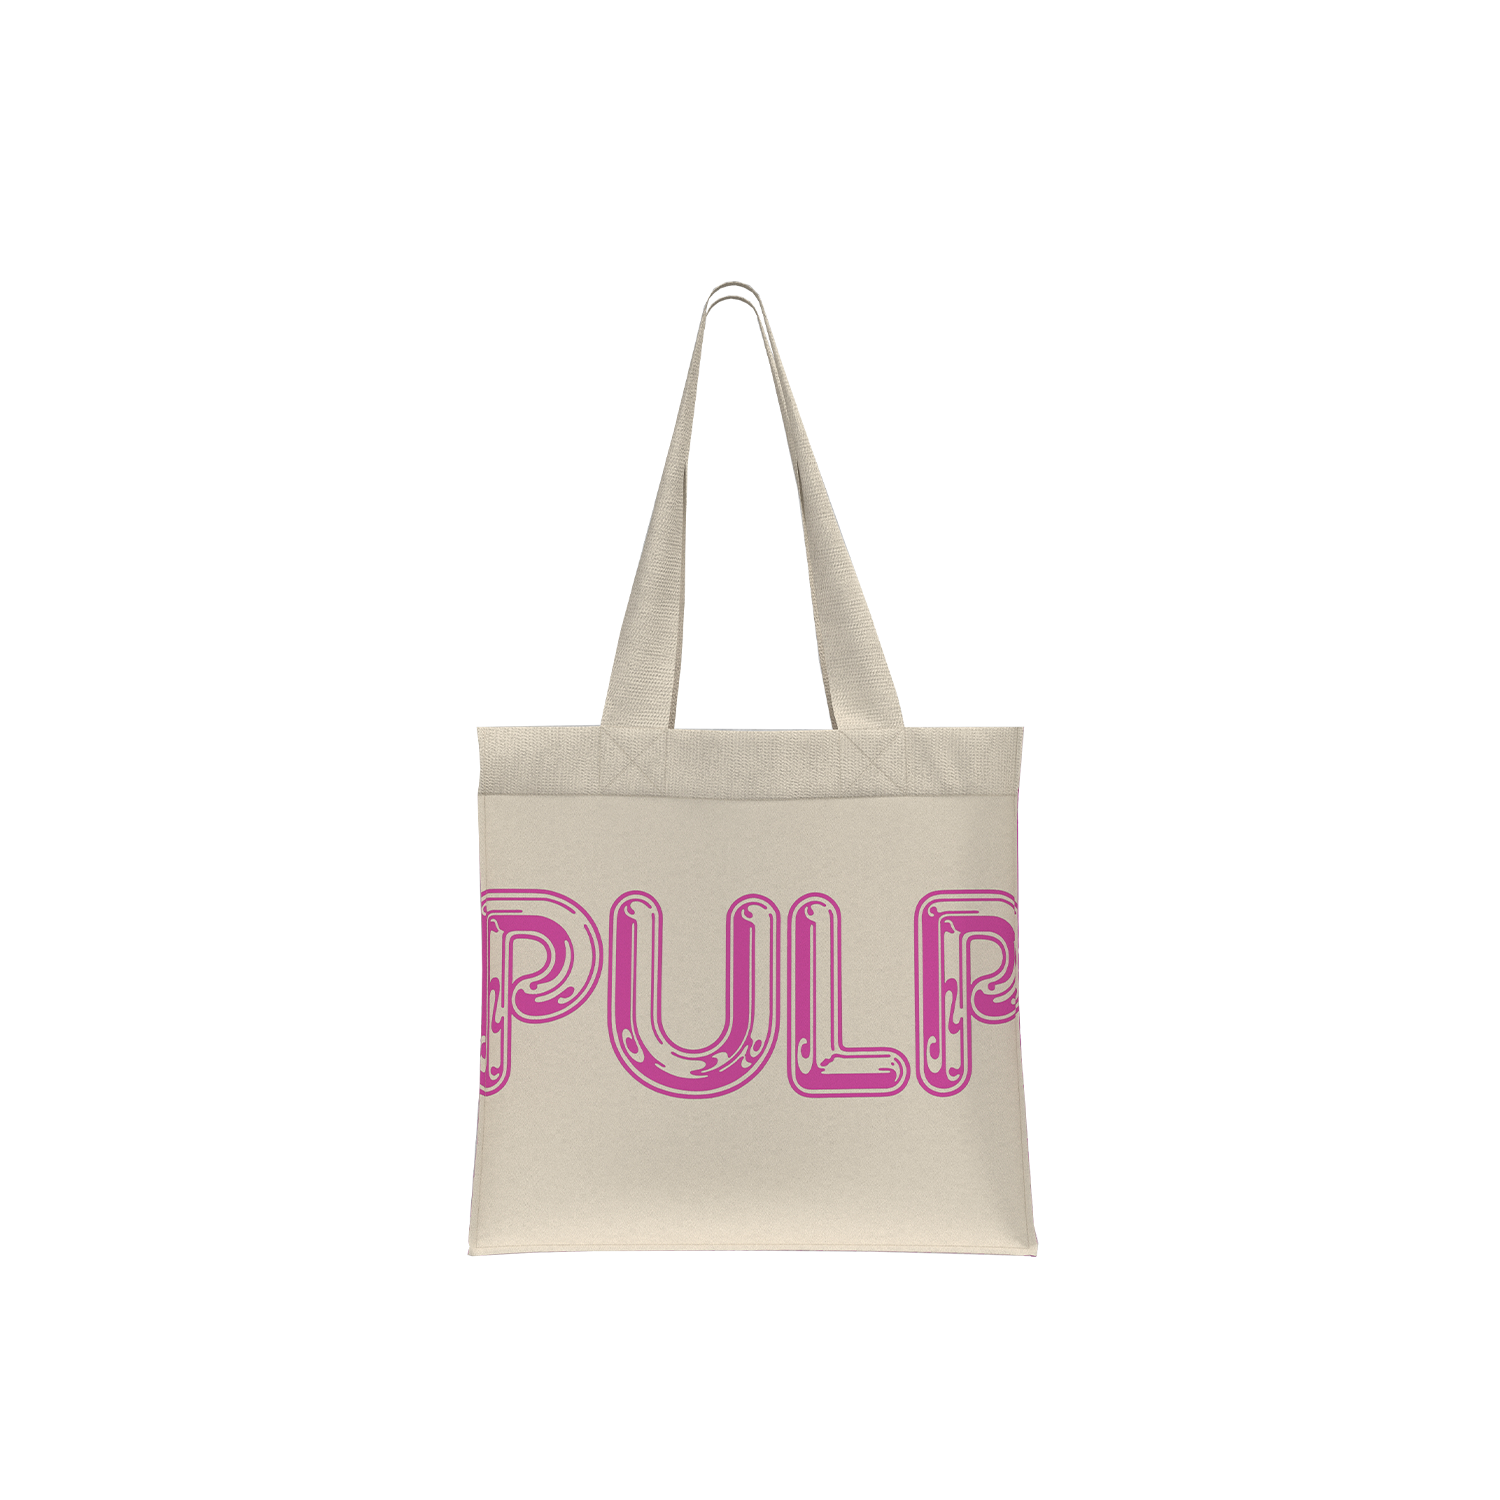 Pulp Fiction (Jarvis Cocker) Organic Tote Bag • The Sheffield Guide